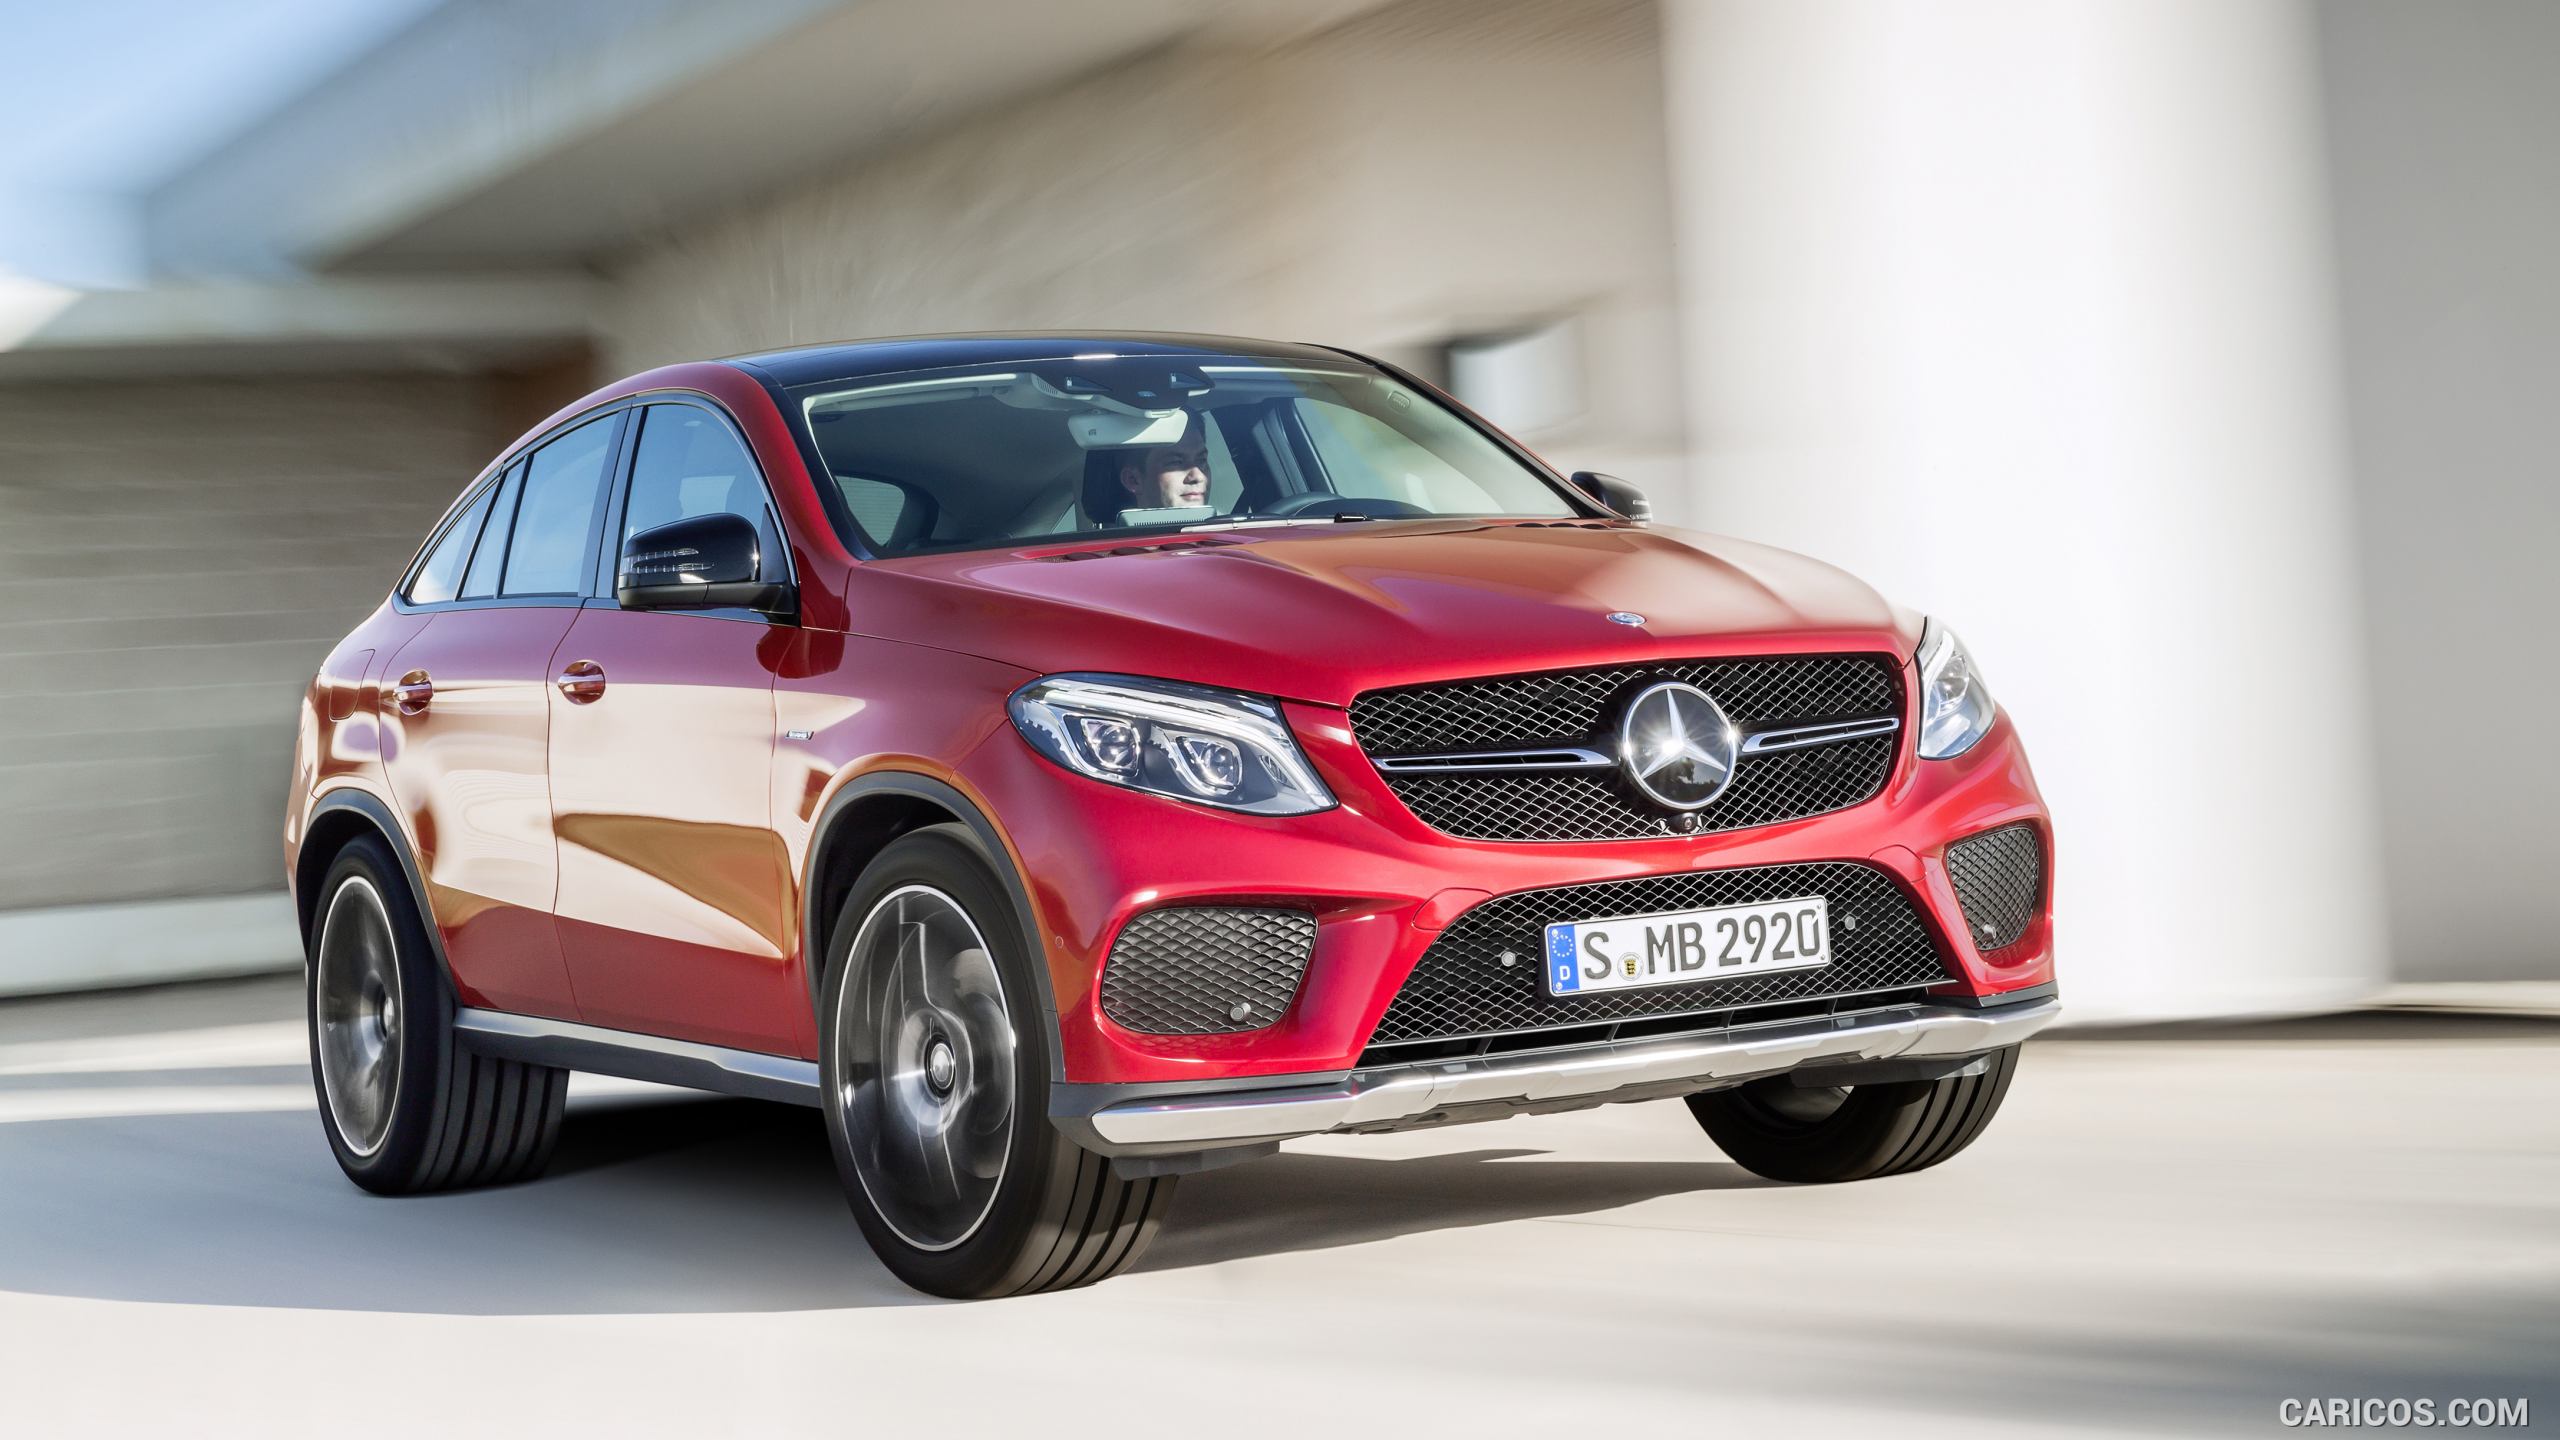 2016 Mercedes-Benz GLE 450 AMG Coupe 4MATIC (Designo Hyacinth Red Metallic) - Front, #11 of 115